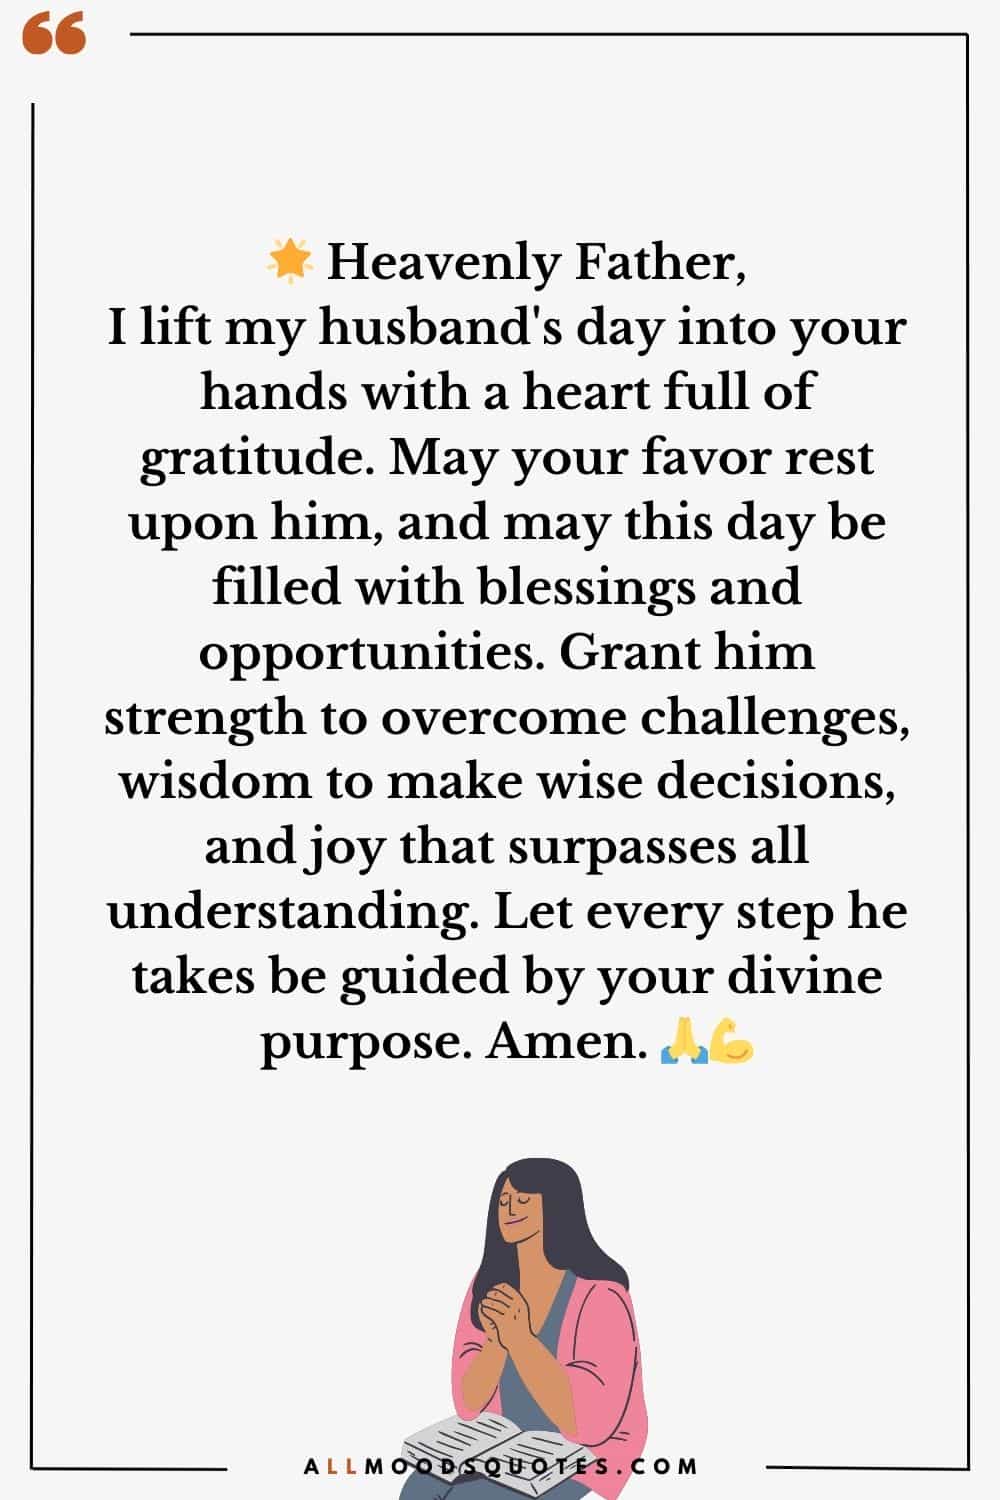 Heavenly Father, I lift my husband's day into your hands with a heart full of gratitude. May your favor rest upon him, and may this day be filled with blessings and opportunities. Grant him strength to overcome challenges, wisdom to make wise decisions, and joy that surpasses all understanding. Let every step he takes be guided by your divine purpose. Amen.